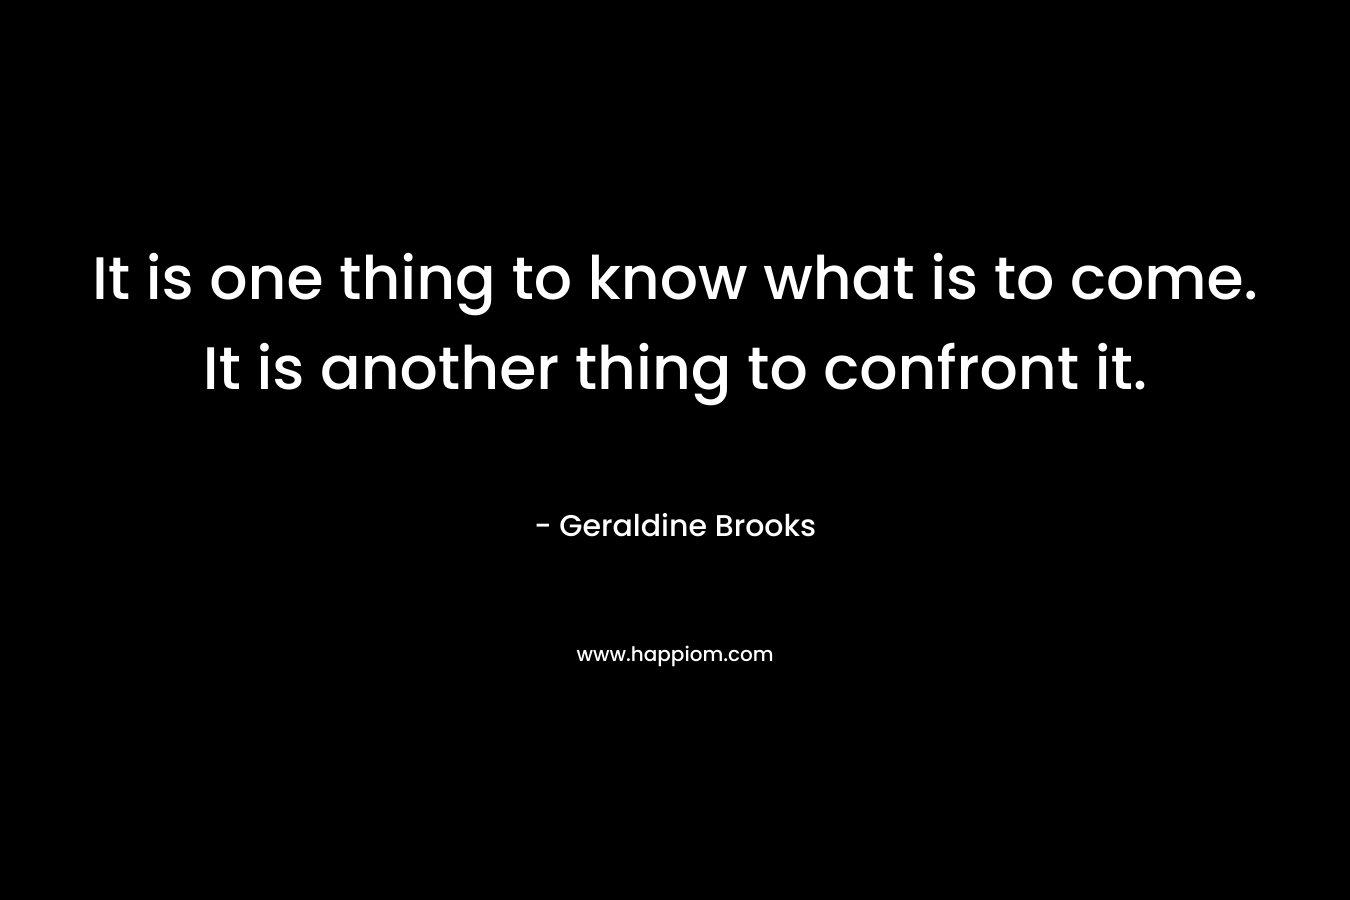 It is one thing to know what is to come. It is another thing to confront it. – Geraldine Brooks